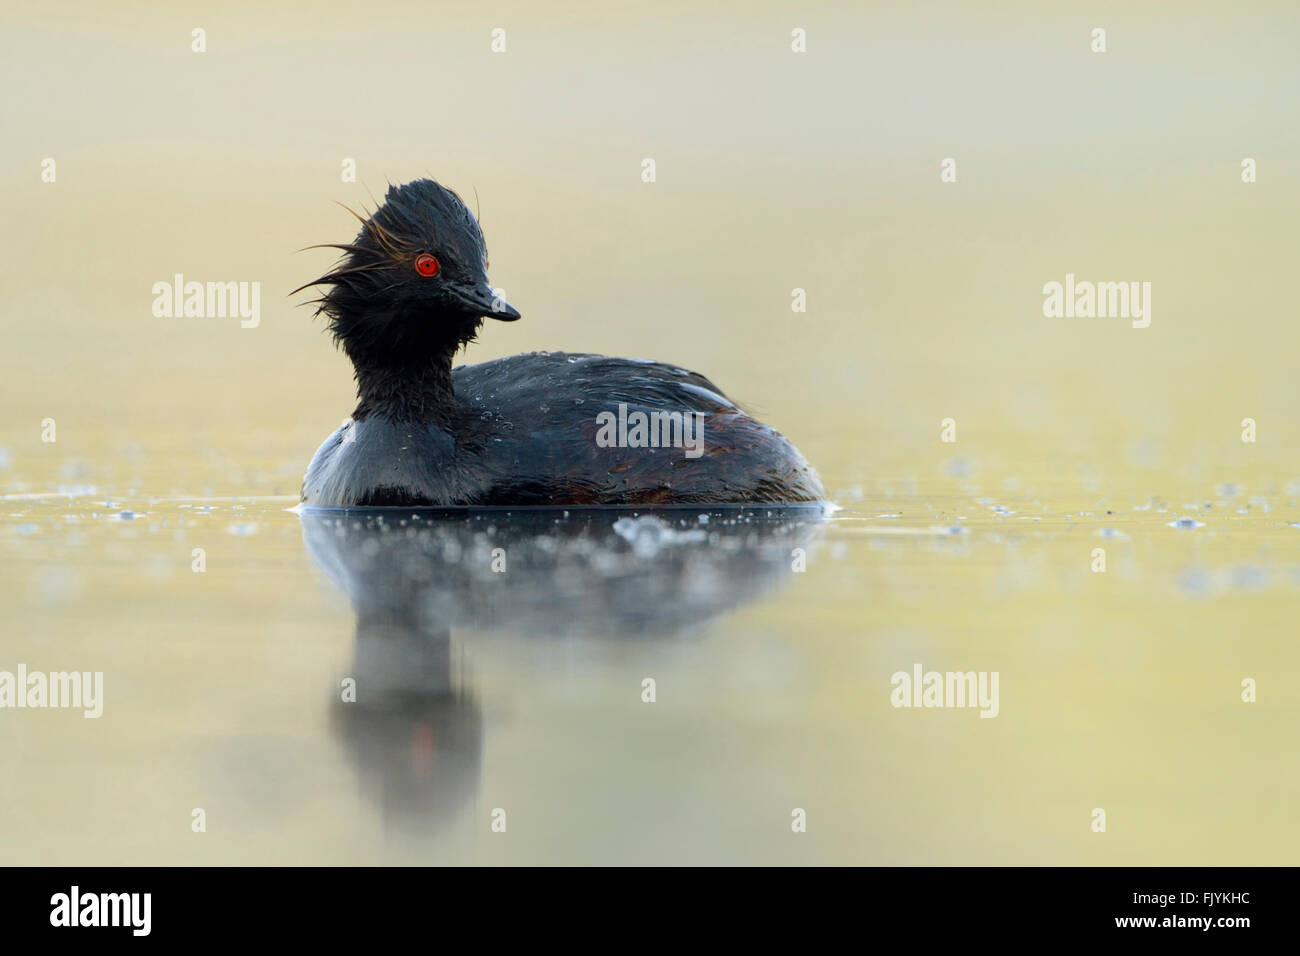 Black-necked Grebe / Eared Grebes ( Podiceps nigricollis ), wet from diving, swims on nice colored water, turn its head. Stock Photo